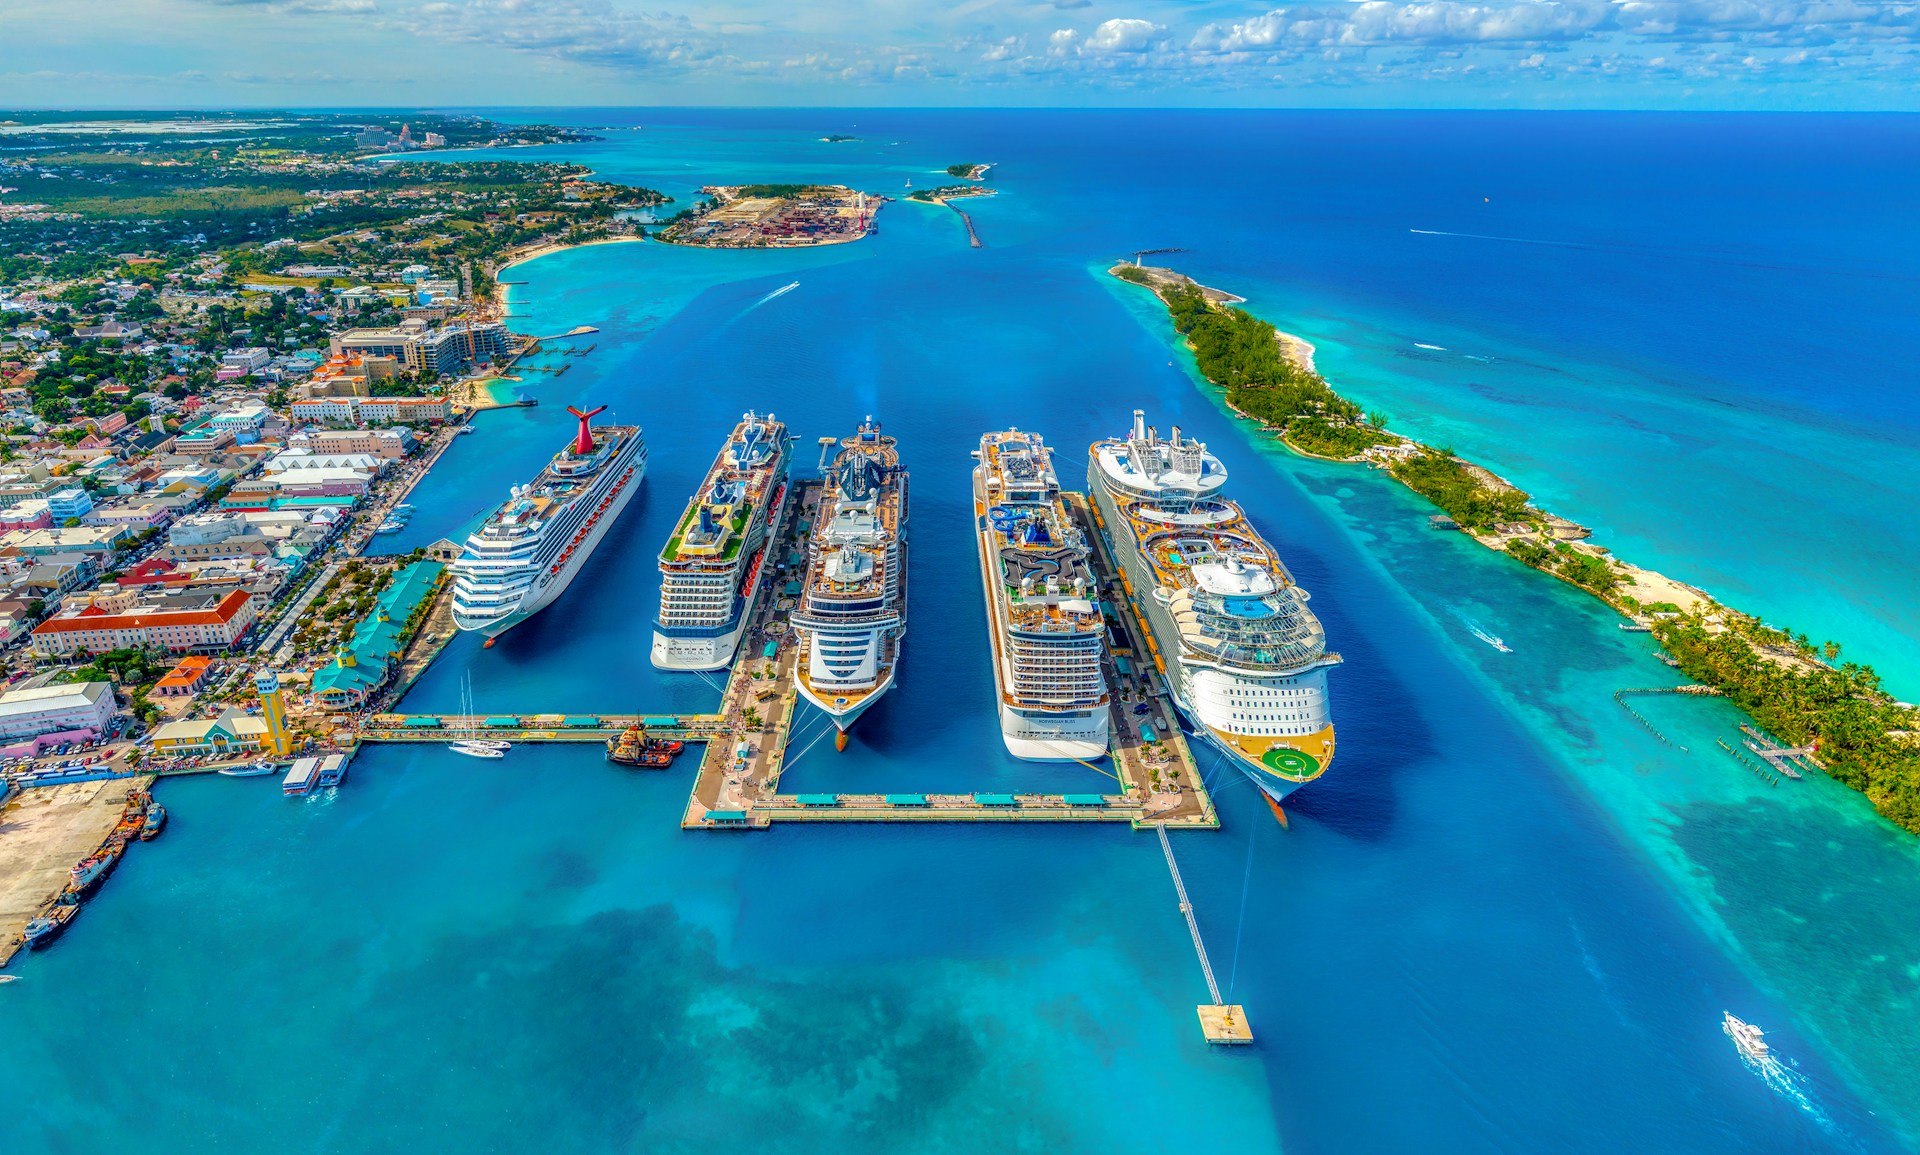 Cruise ships docked at a port